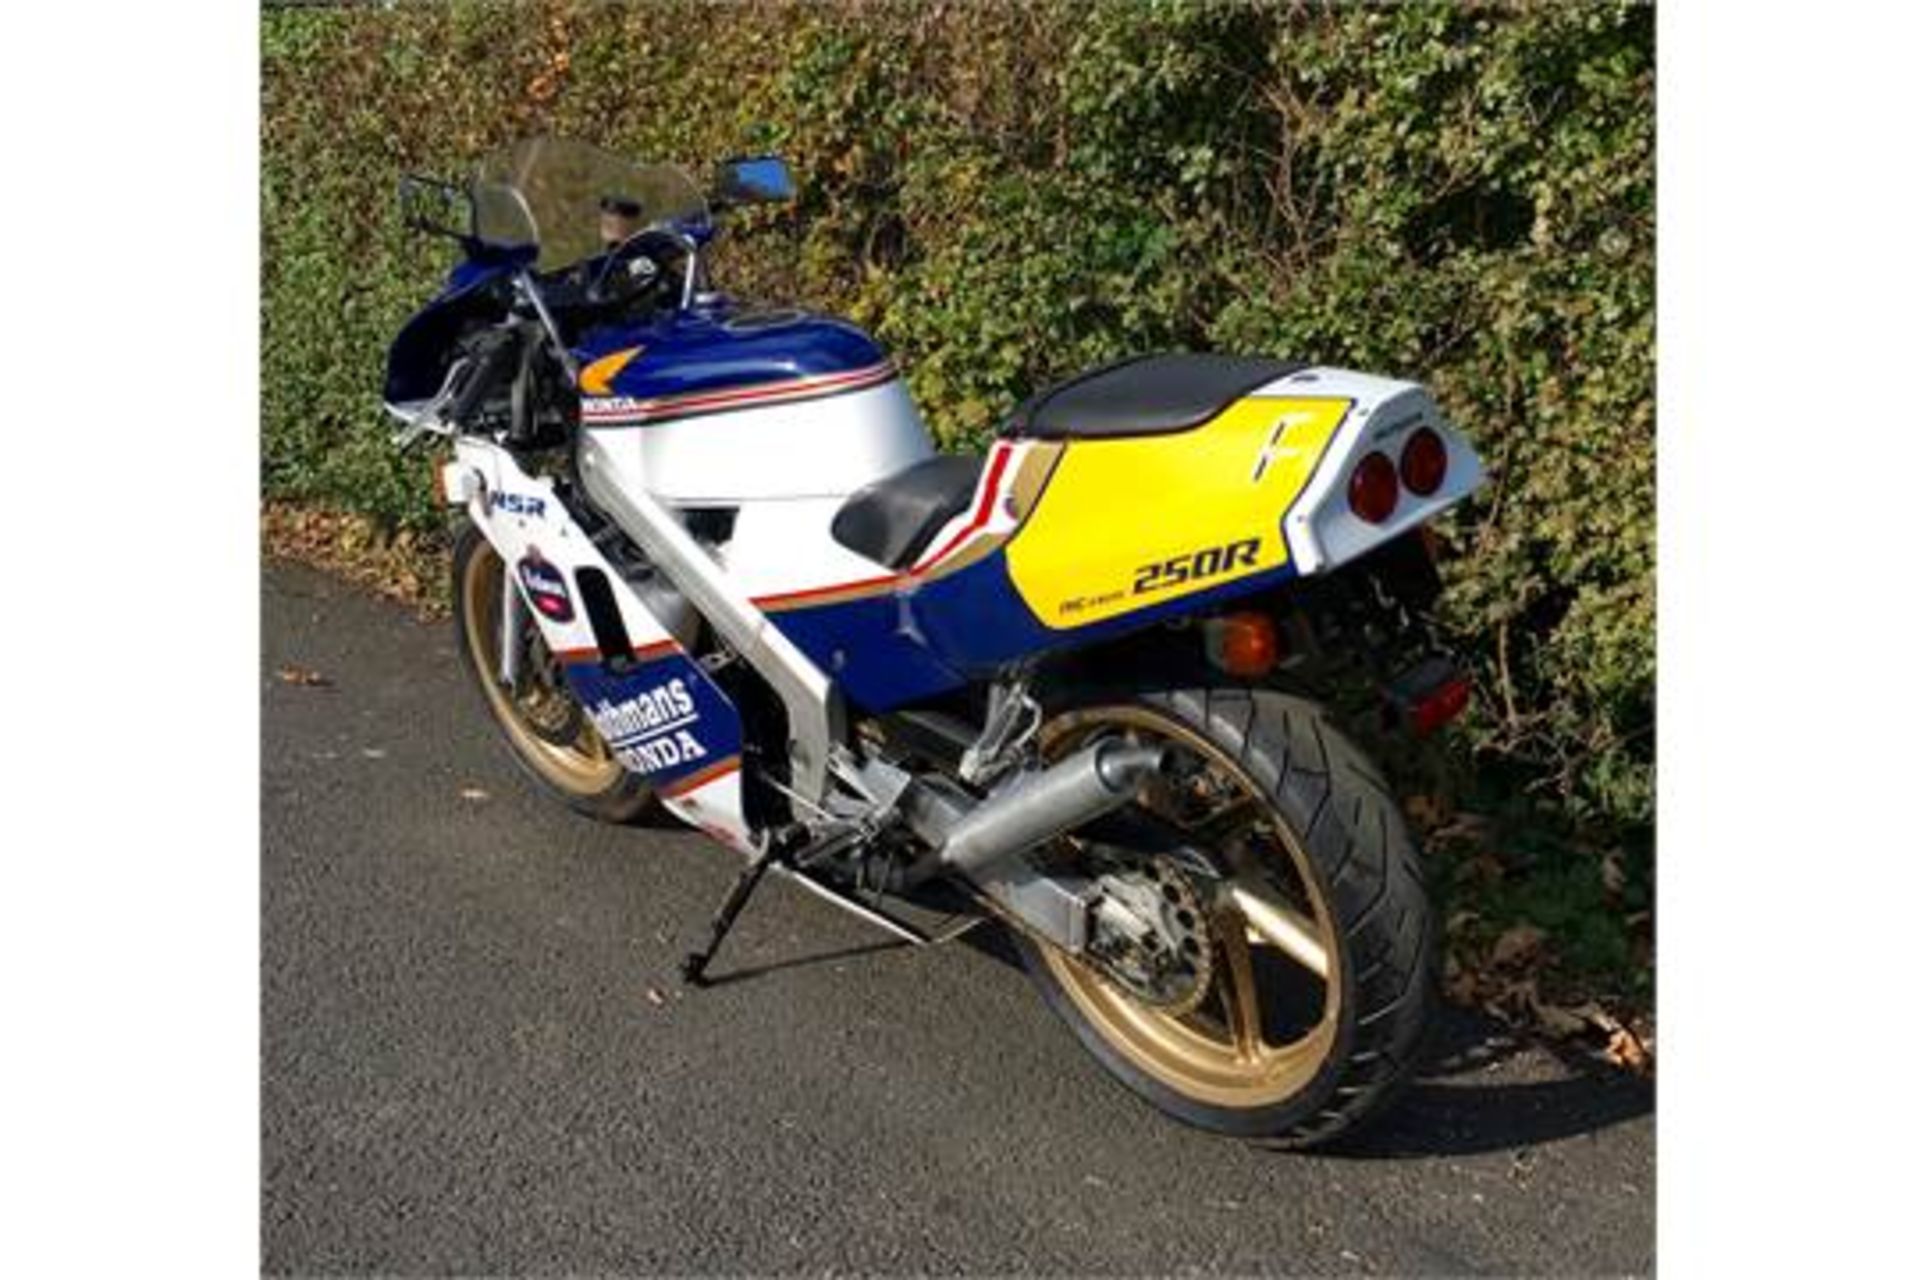 1988 Honda NSR250R SP RJ4 Rothmans Only 5,000kms From New - Image 6 of 9